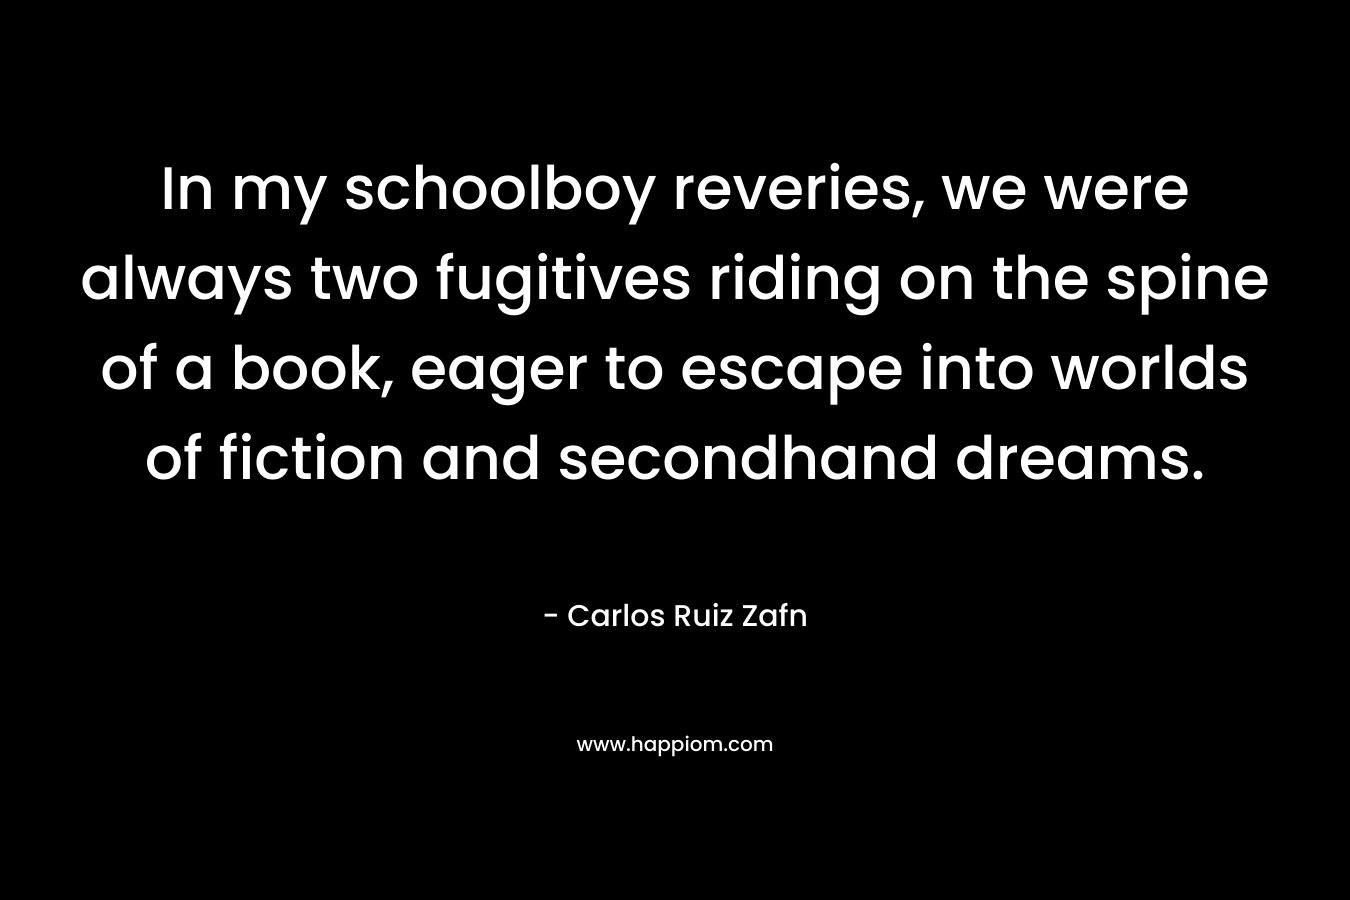 In my schoolboy reveries, we were always two fugitives riding on the spine of a book, eager to escape into worlds of fiction and secondhand dreams.